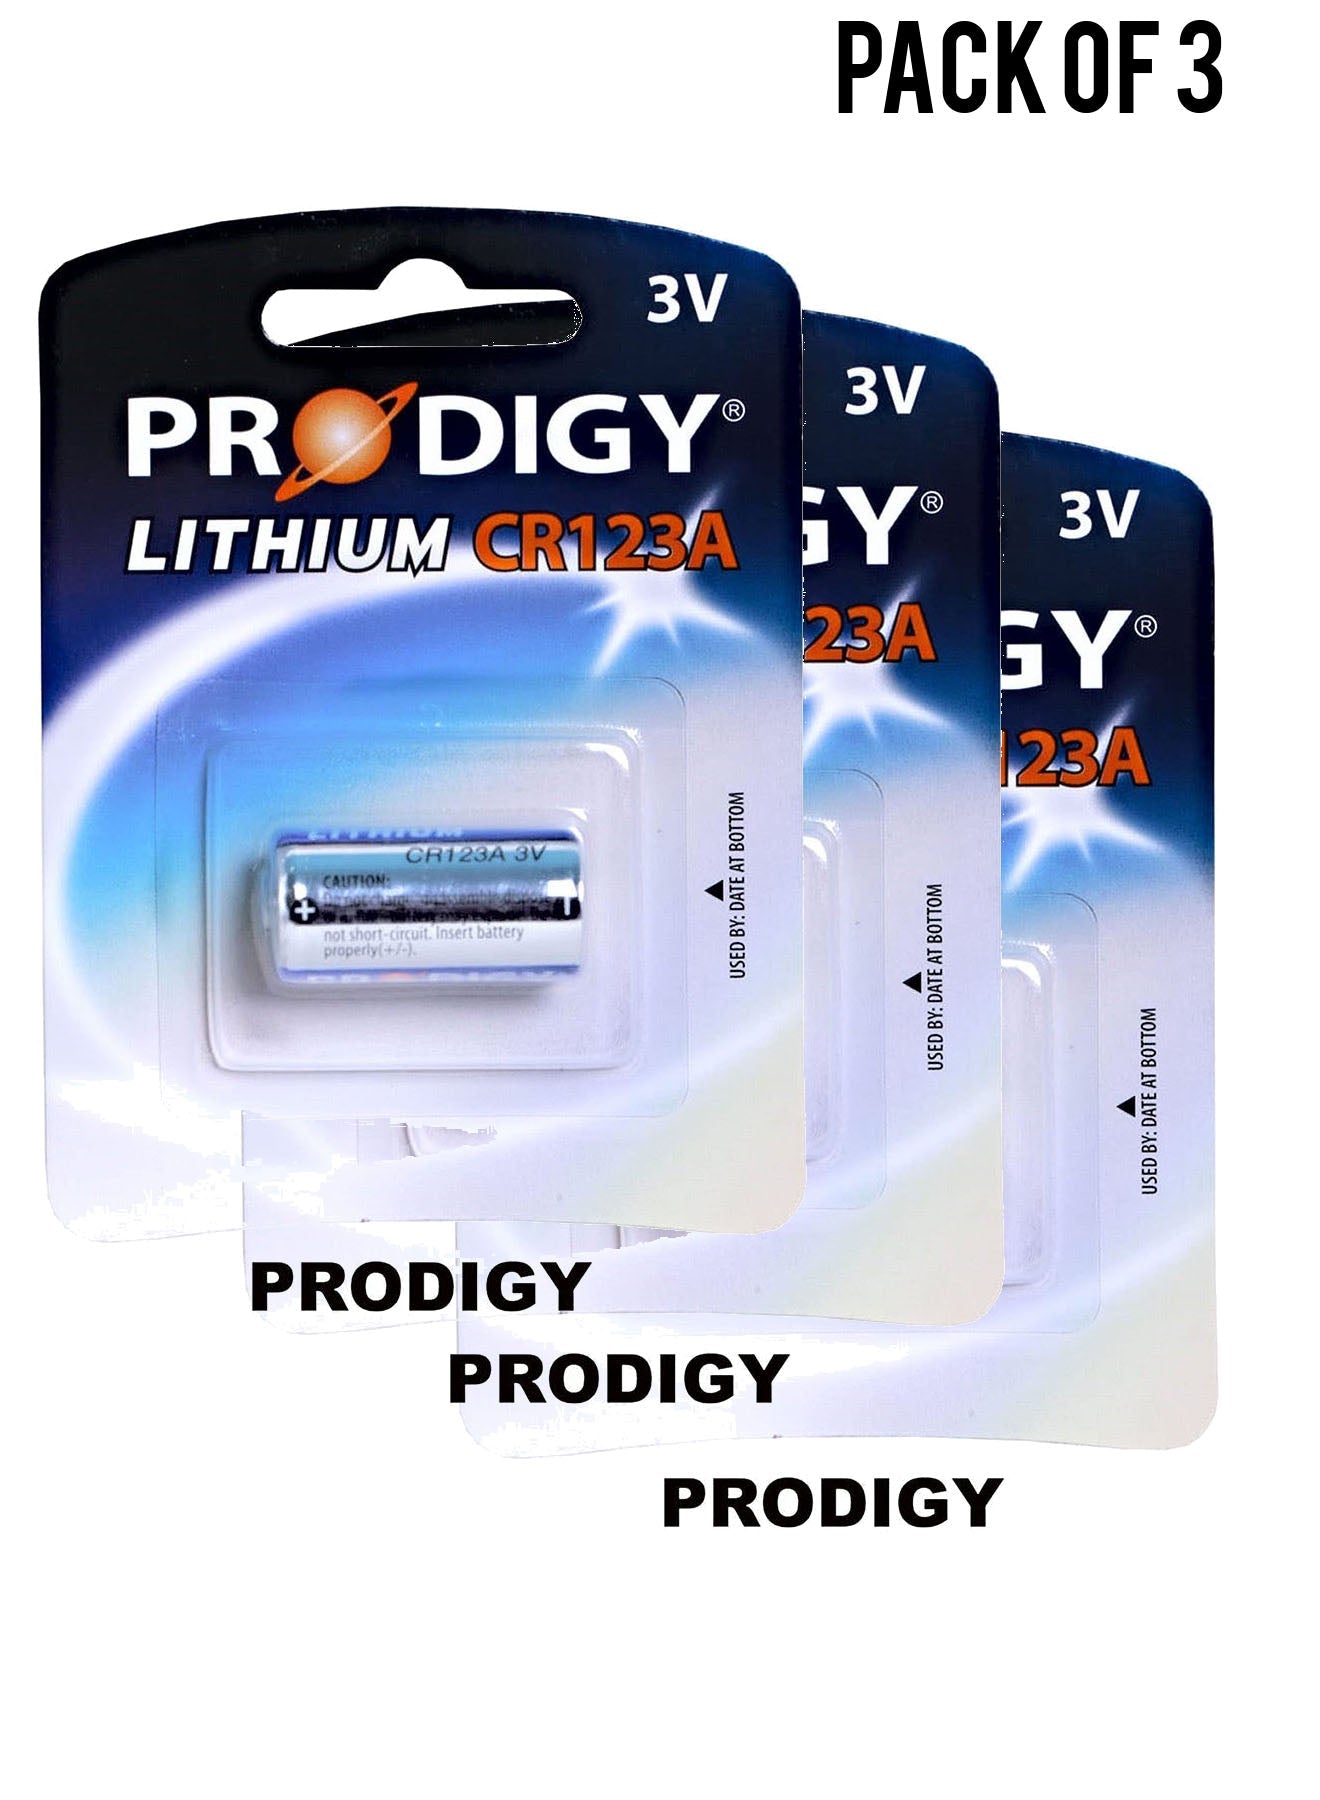 Prodigy Lithium CR123A 3V Value Pack of 3 